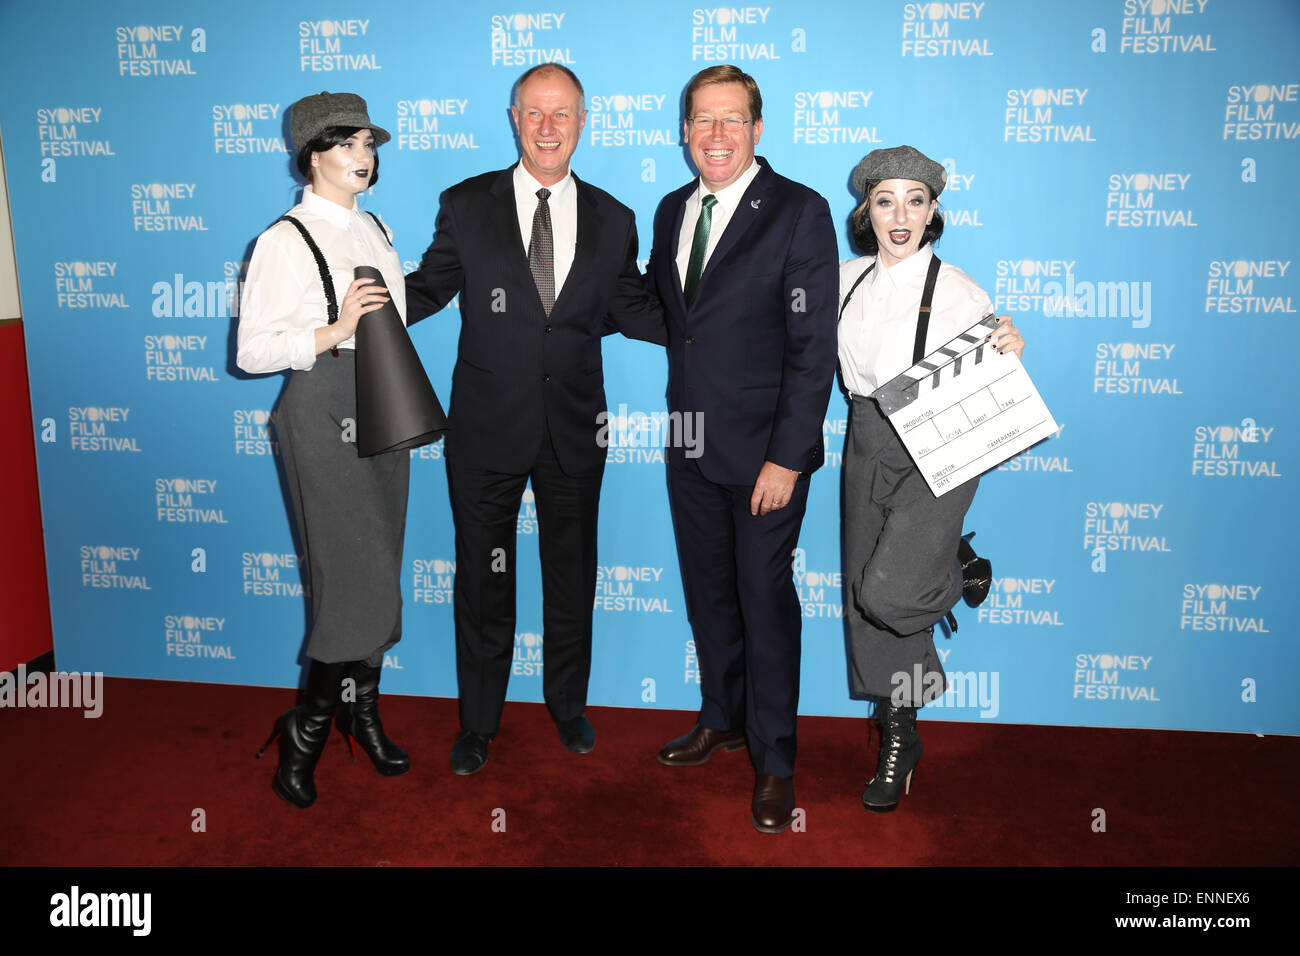 6 May 2015. 62nd Sydney Film Festival launch, L-R: Lexus Australia CEO Sean Hanley and Minister Troy Grant with ushers. Stock Photo